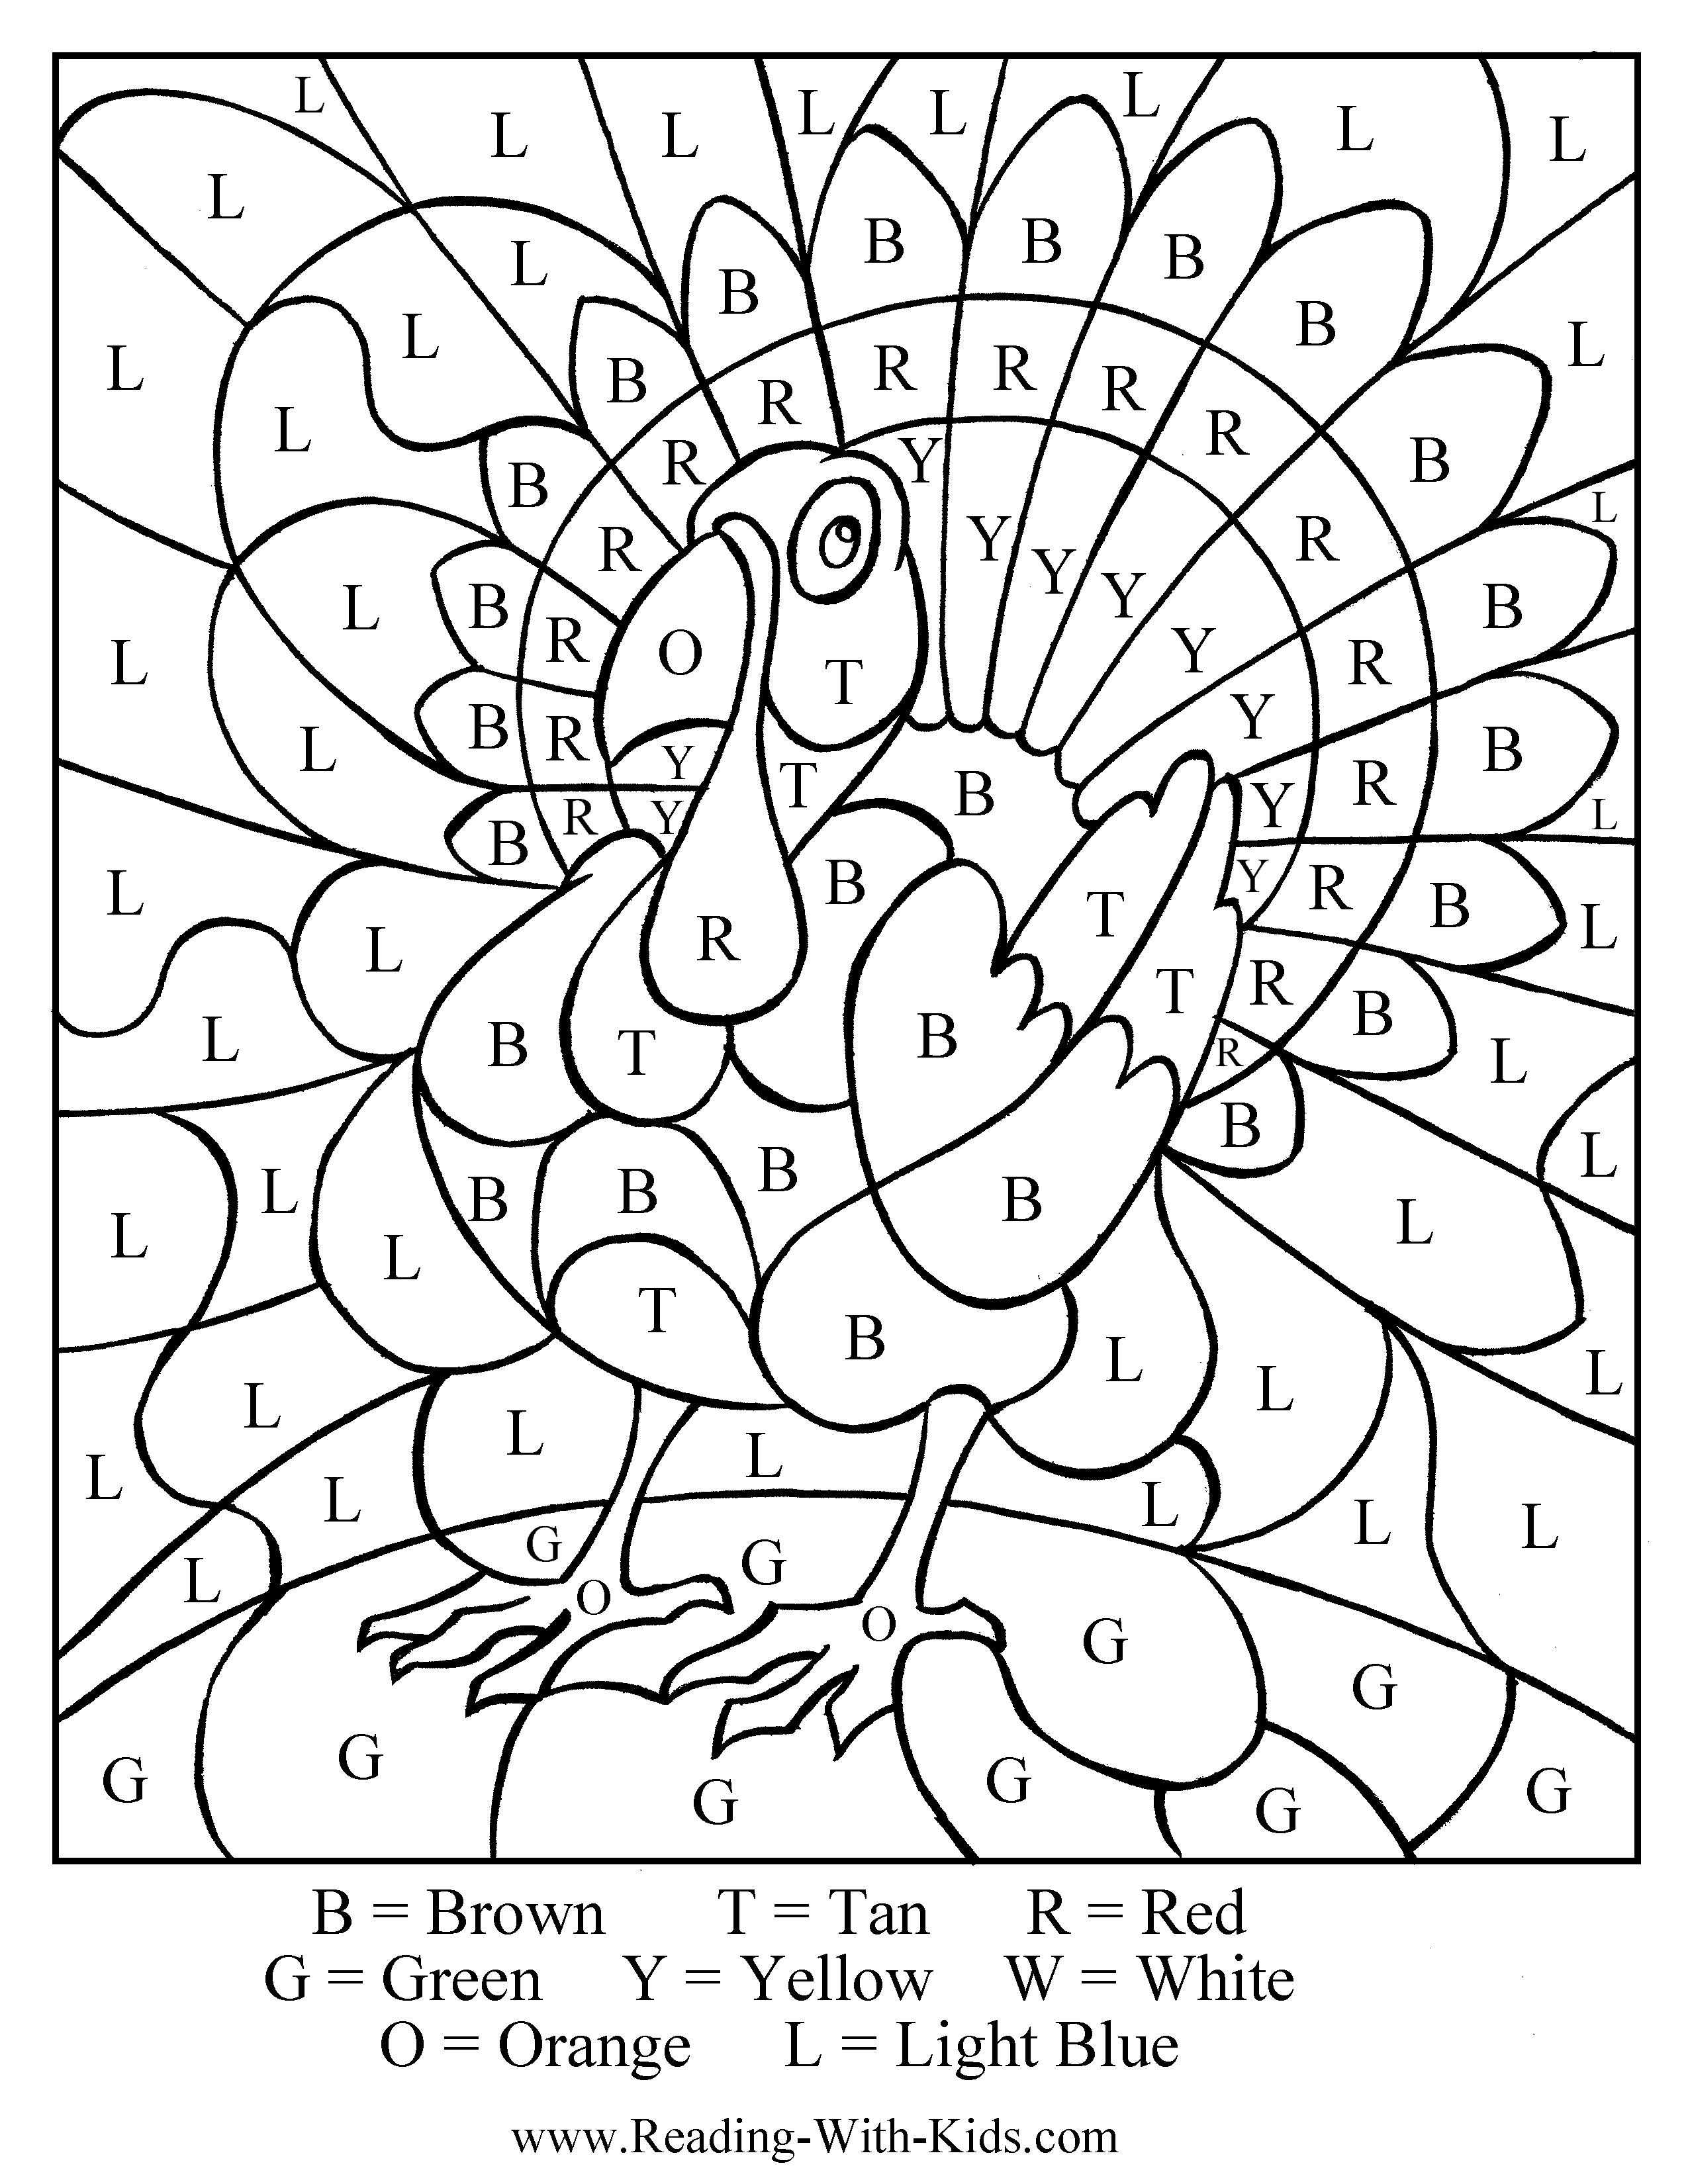 Colorletter Turkey - Great Idea For Thanksgiving #thanksgiving | Free Printable Thanksgiving Worksheets For Middle School